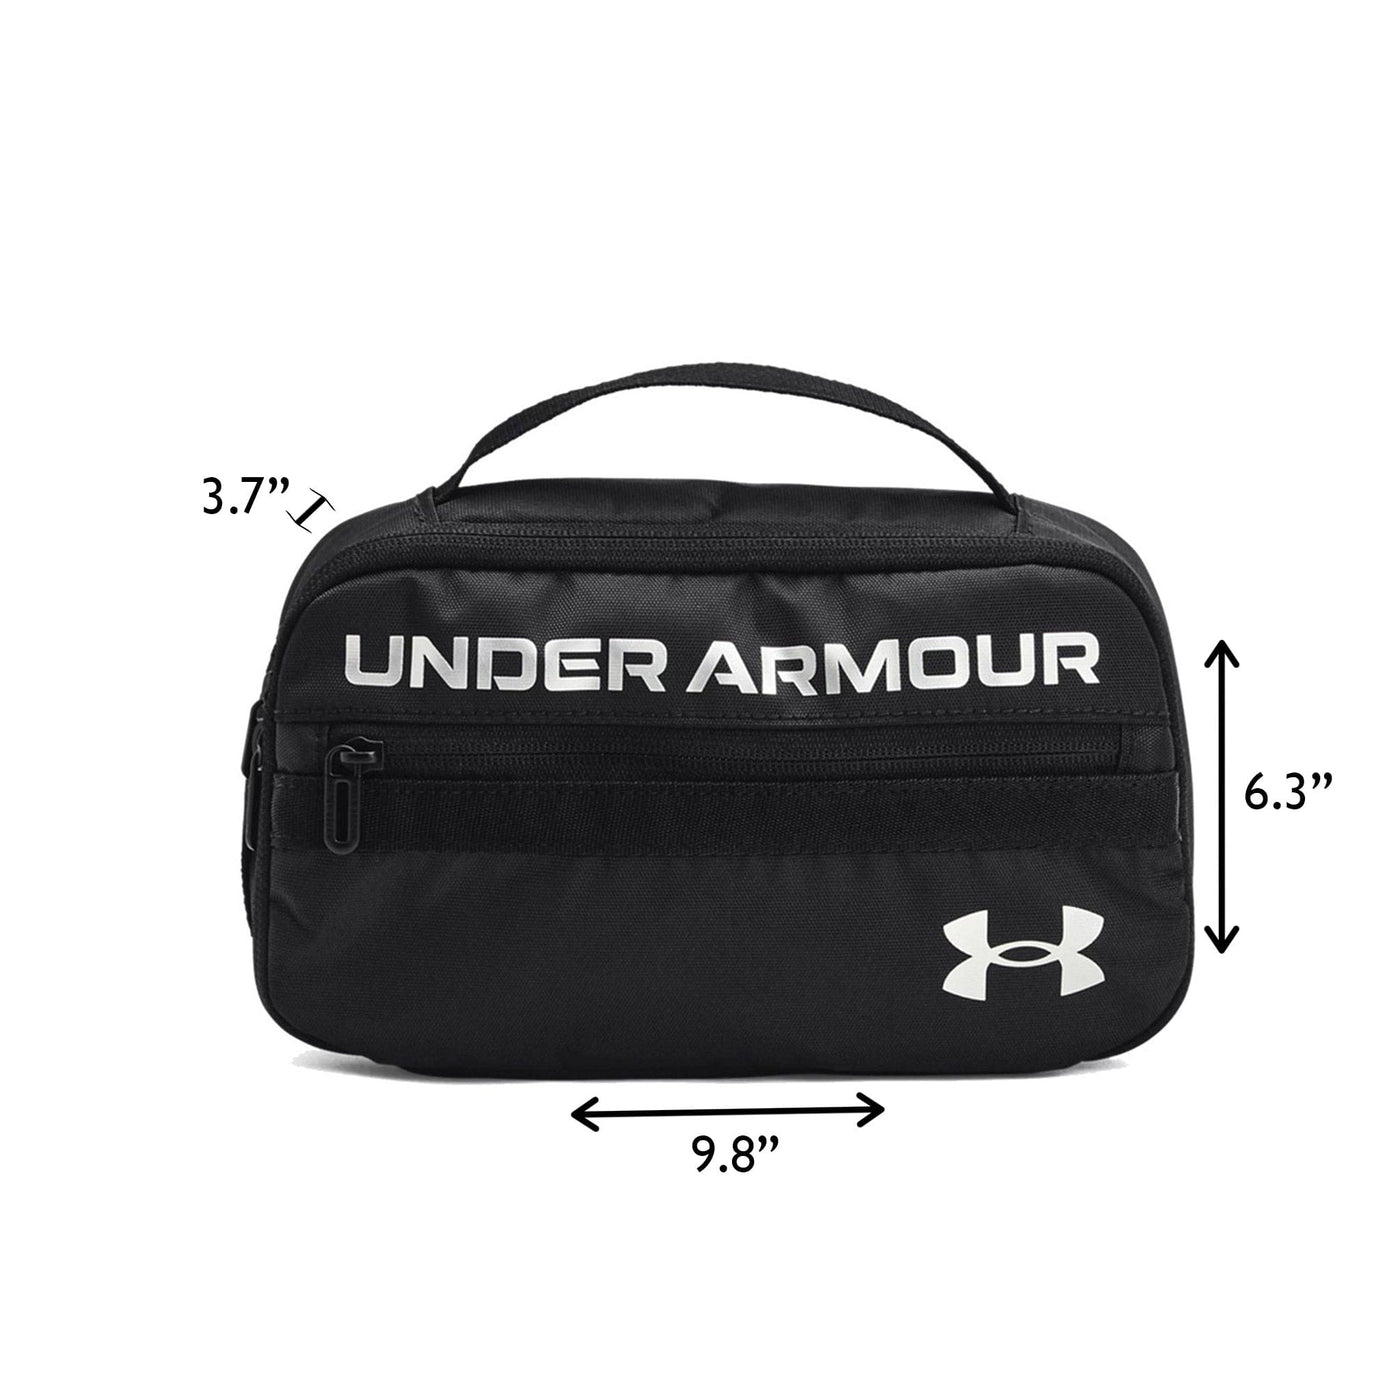 Under Armour Toiletry Bag